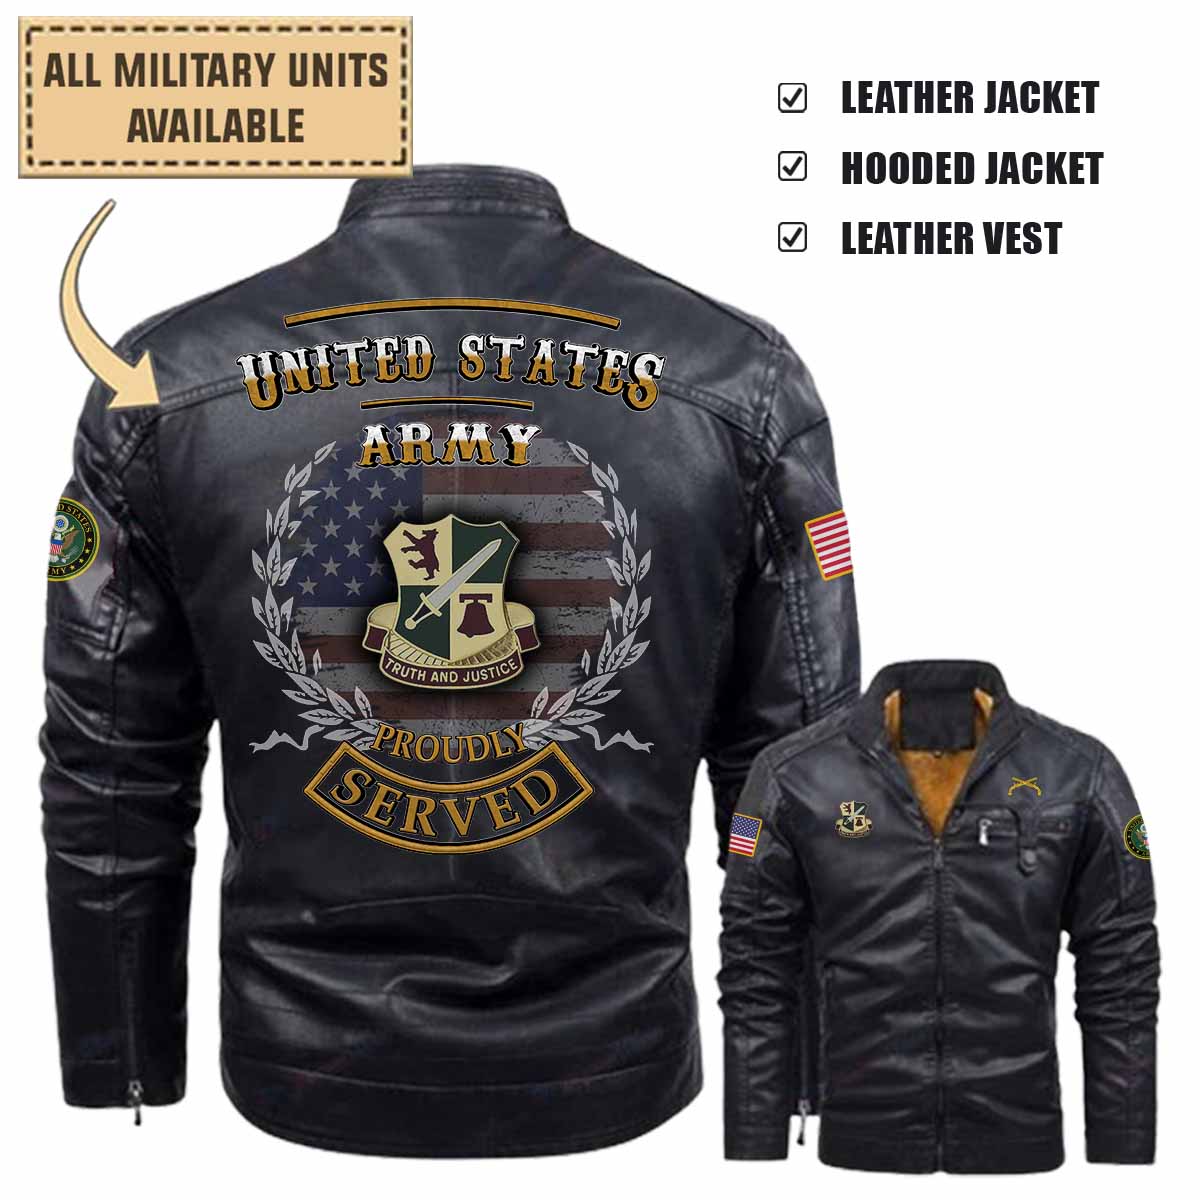 393rd MP BN 393rd Military Police Battalion_Military Leather Jacket and Vest